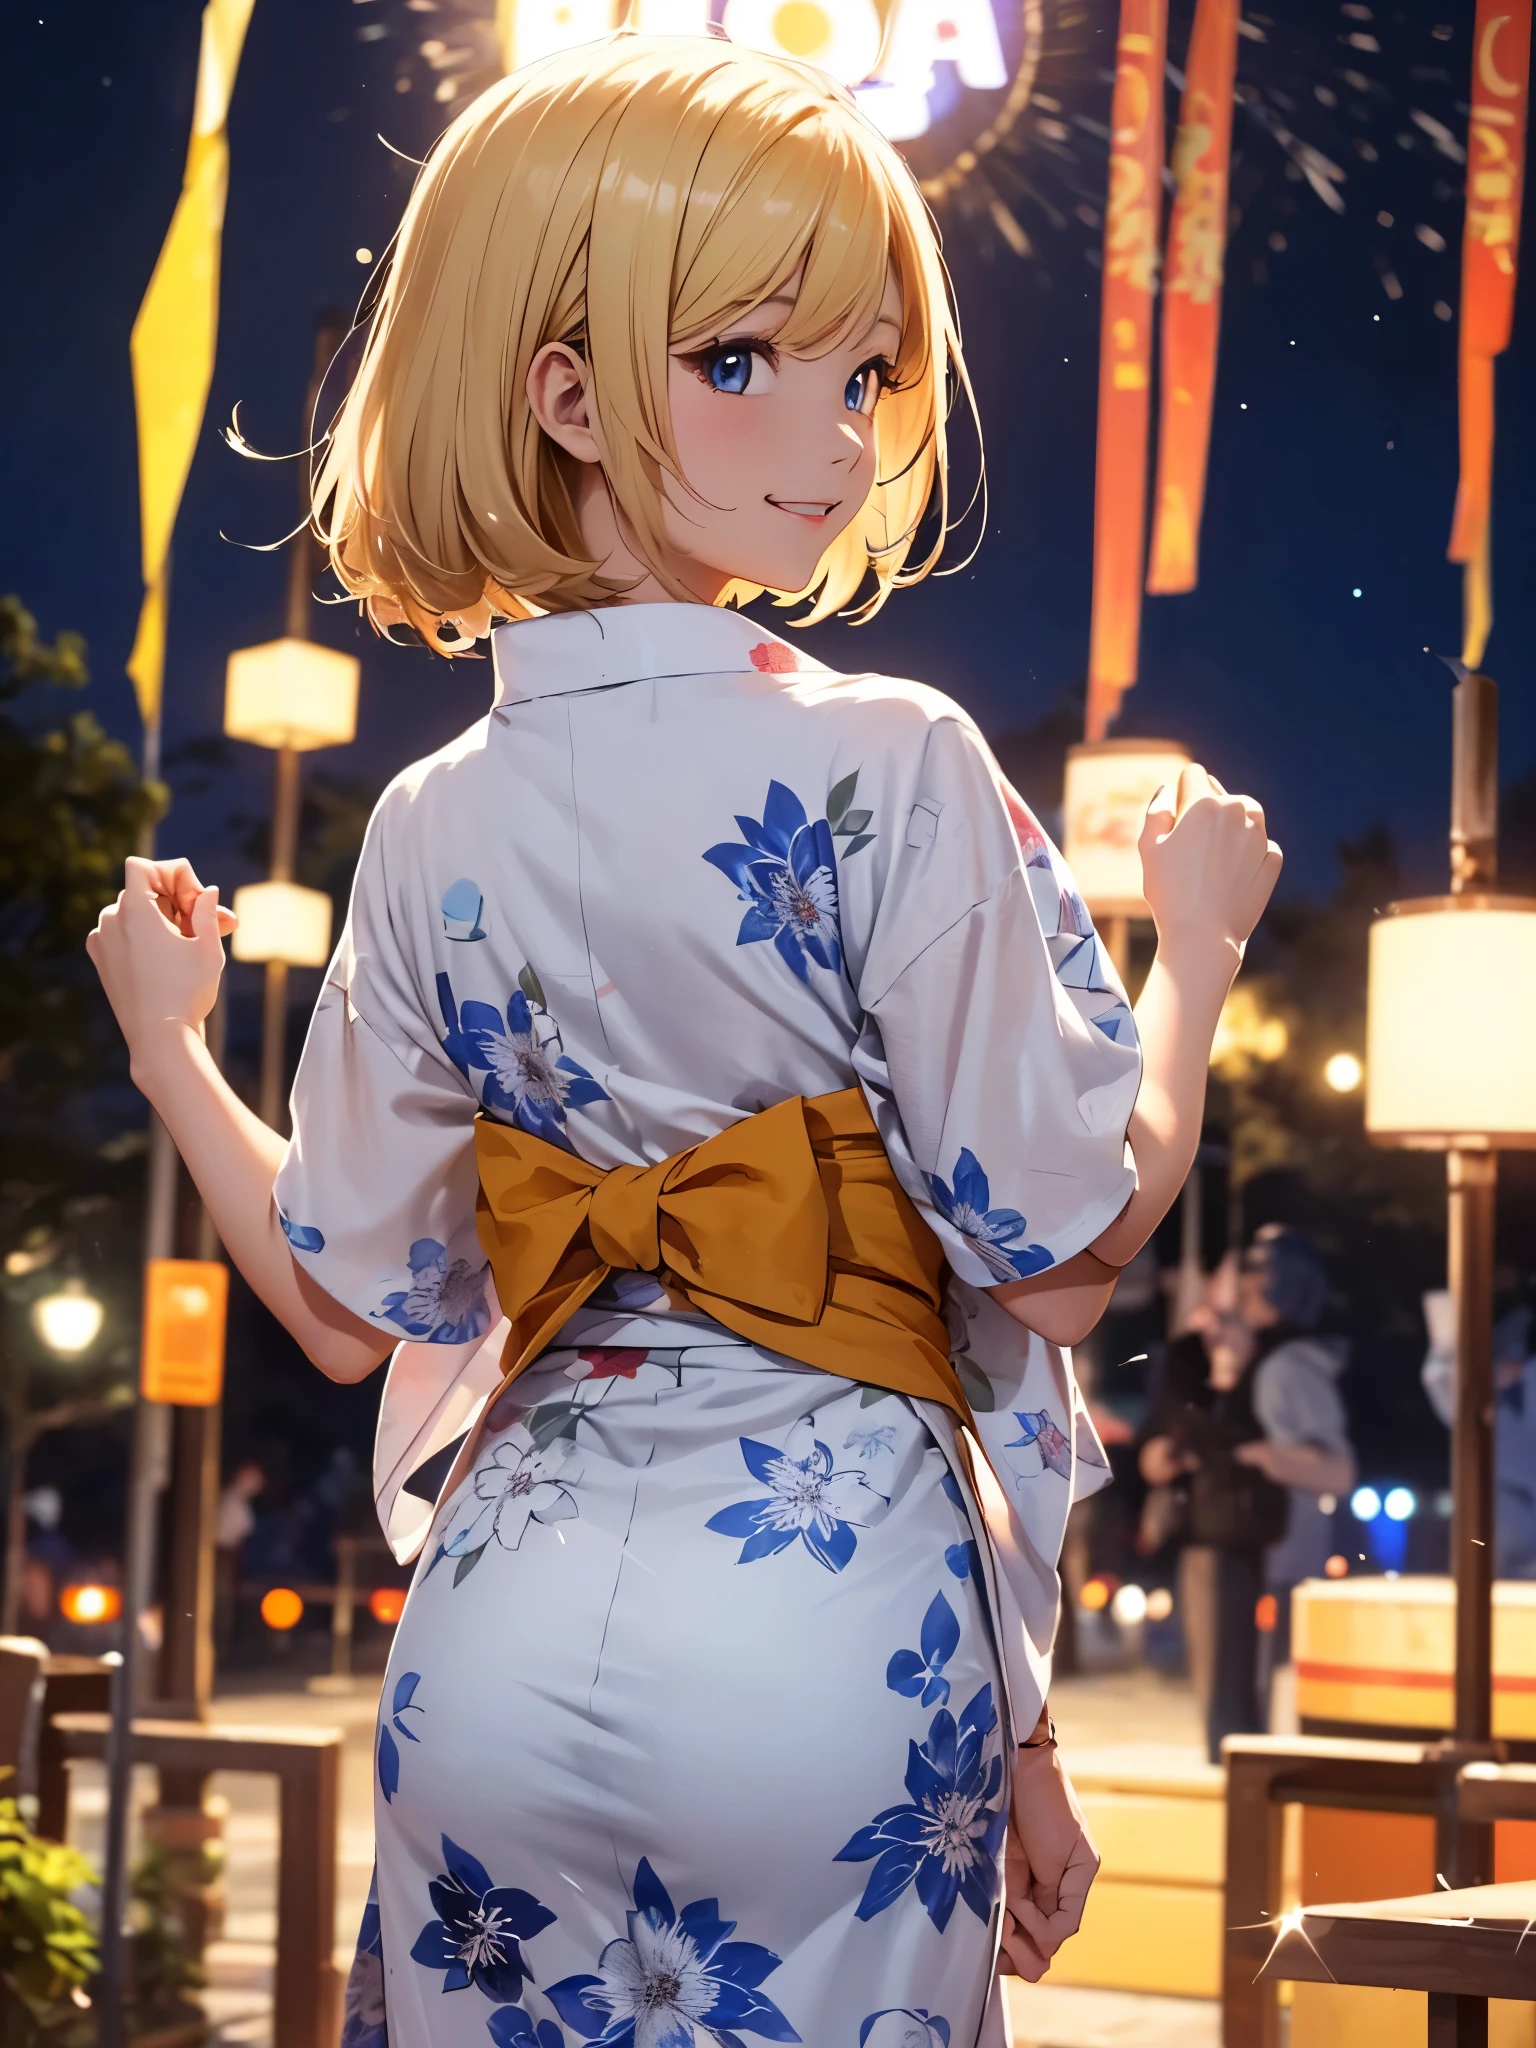 (((ultra high definition))), (((salina))), (Pokémon), masterpiece, best quality, detailed, (1 girl), alone, (Super detailed blue eyes, Blonde long and short hair, permanent: 1.2), (((hands in arms))), (cool yukata), Happy smile, (small breasts, healthy body :1.2), (Put your arms behind your back), Stone road, starry sky, (fireworks), Night festival in the background,